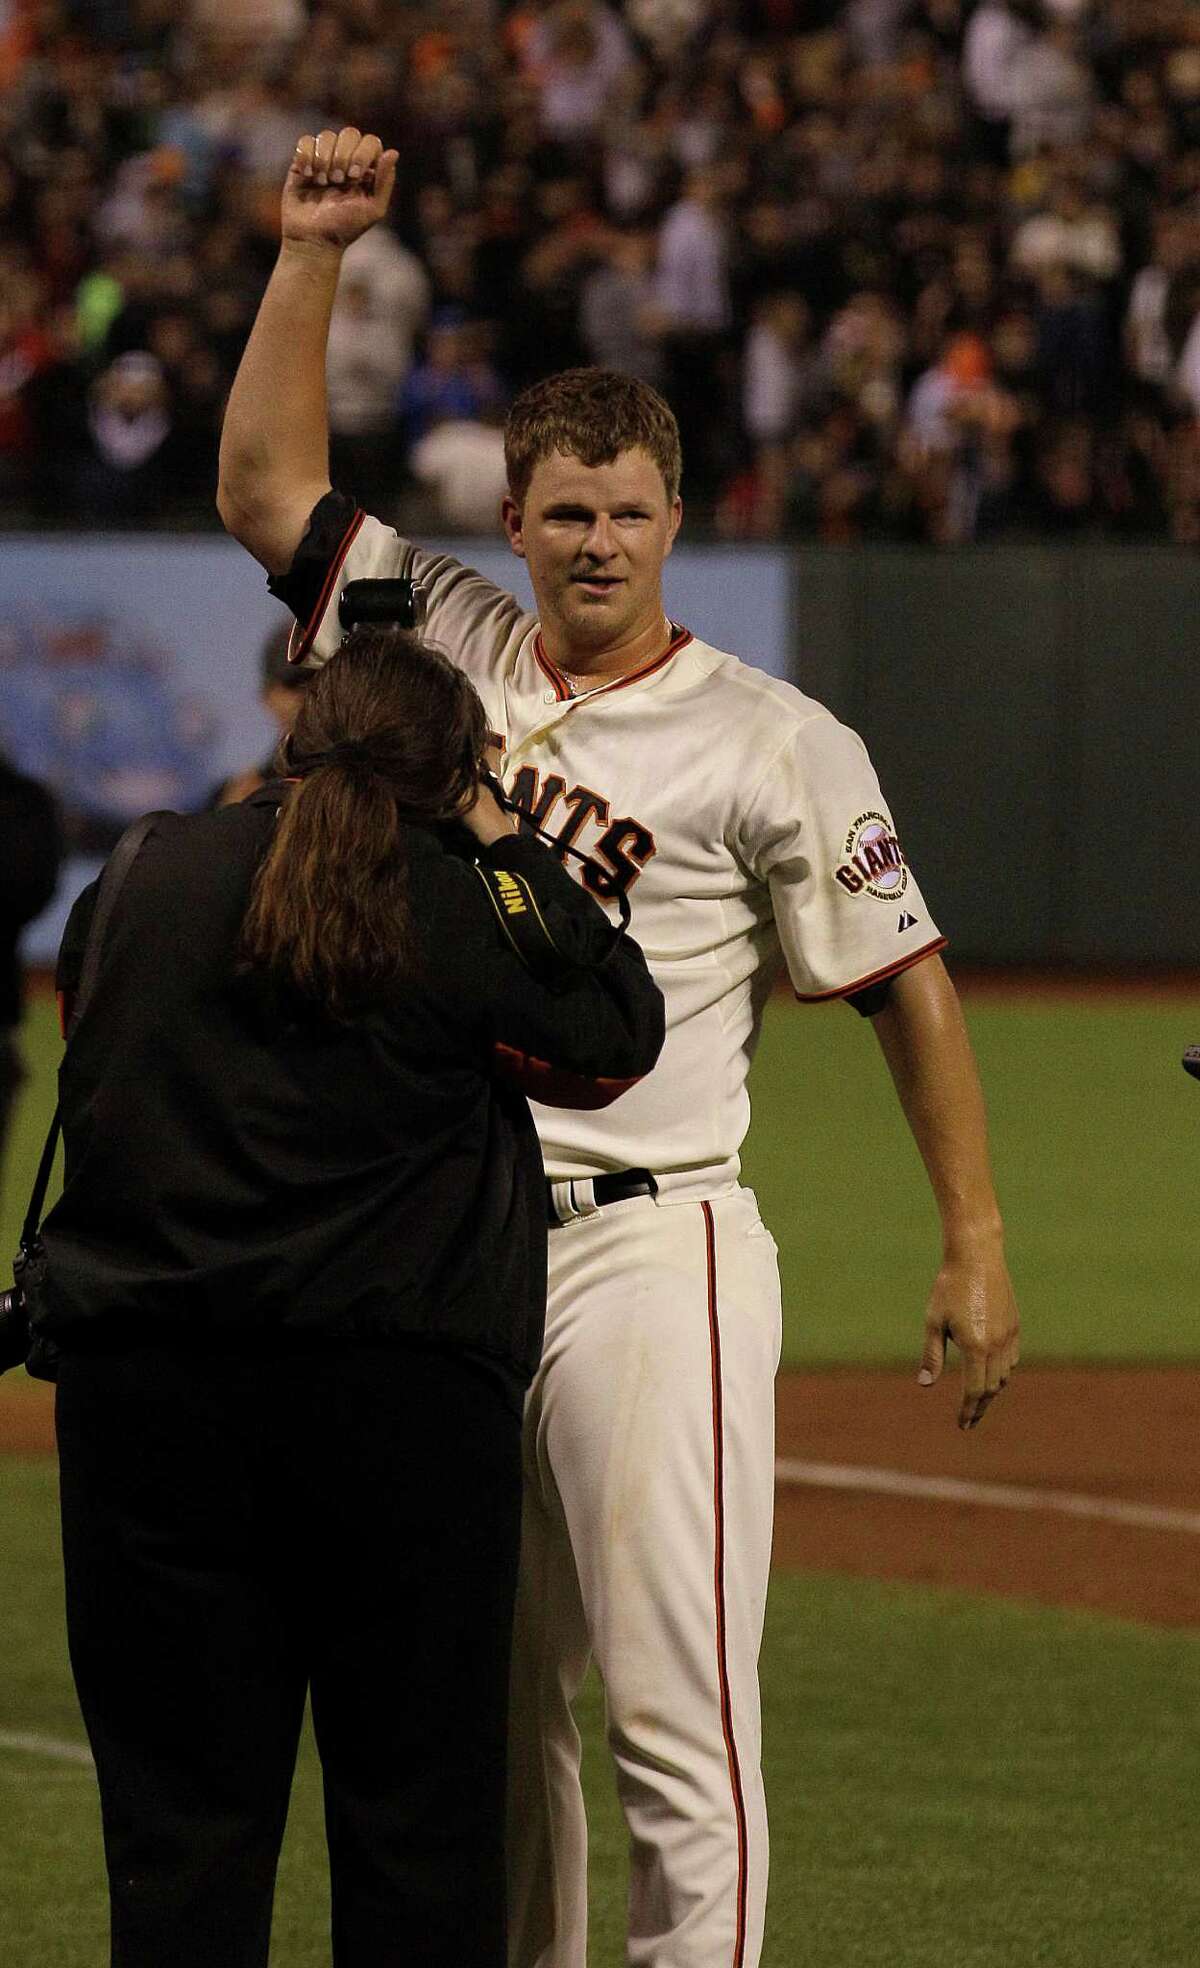 San Francisco Giants pitcher Matt Cain celebrates after the final out of the ninth inning of a baseball game against the Houston Astros in San Francisco, Wednesday, June 13, 2012. Cain pitched a perfect game. The Giants won 10-0. (AP Photo/Jeff Chiu)